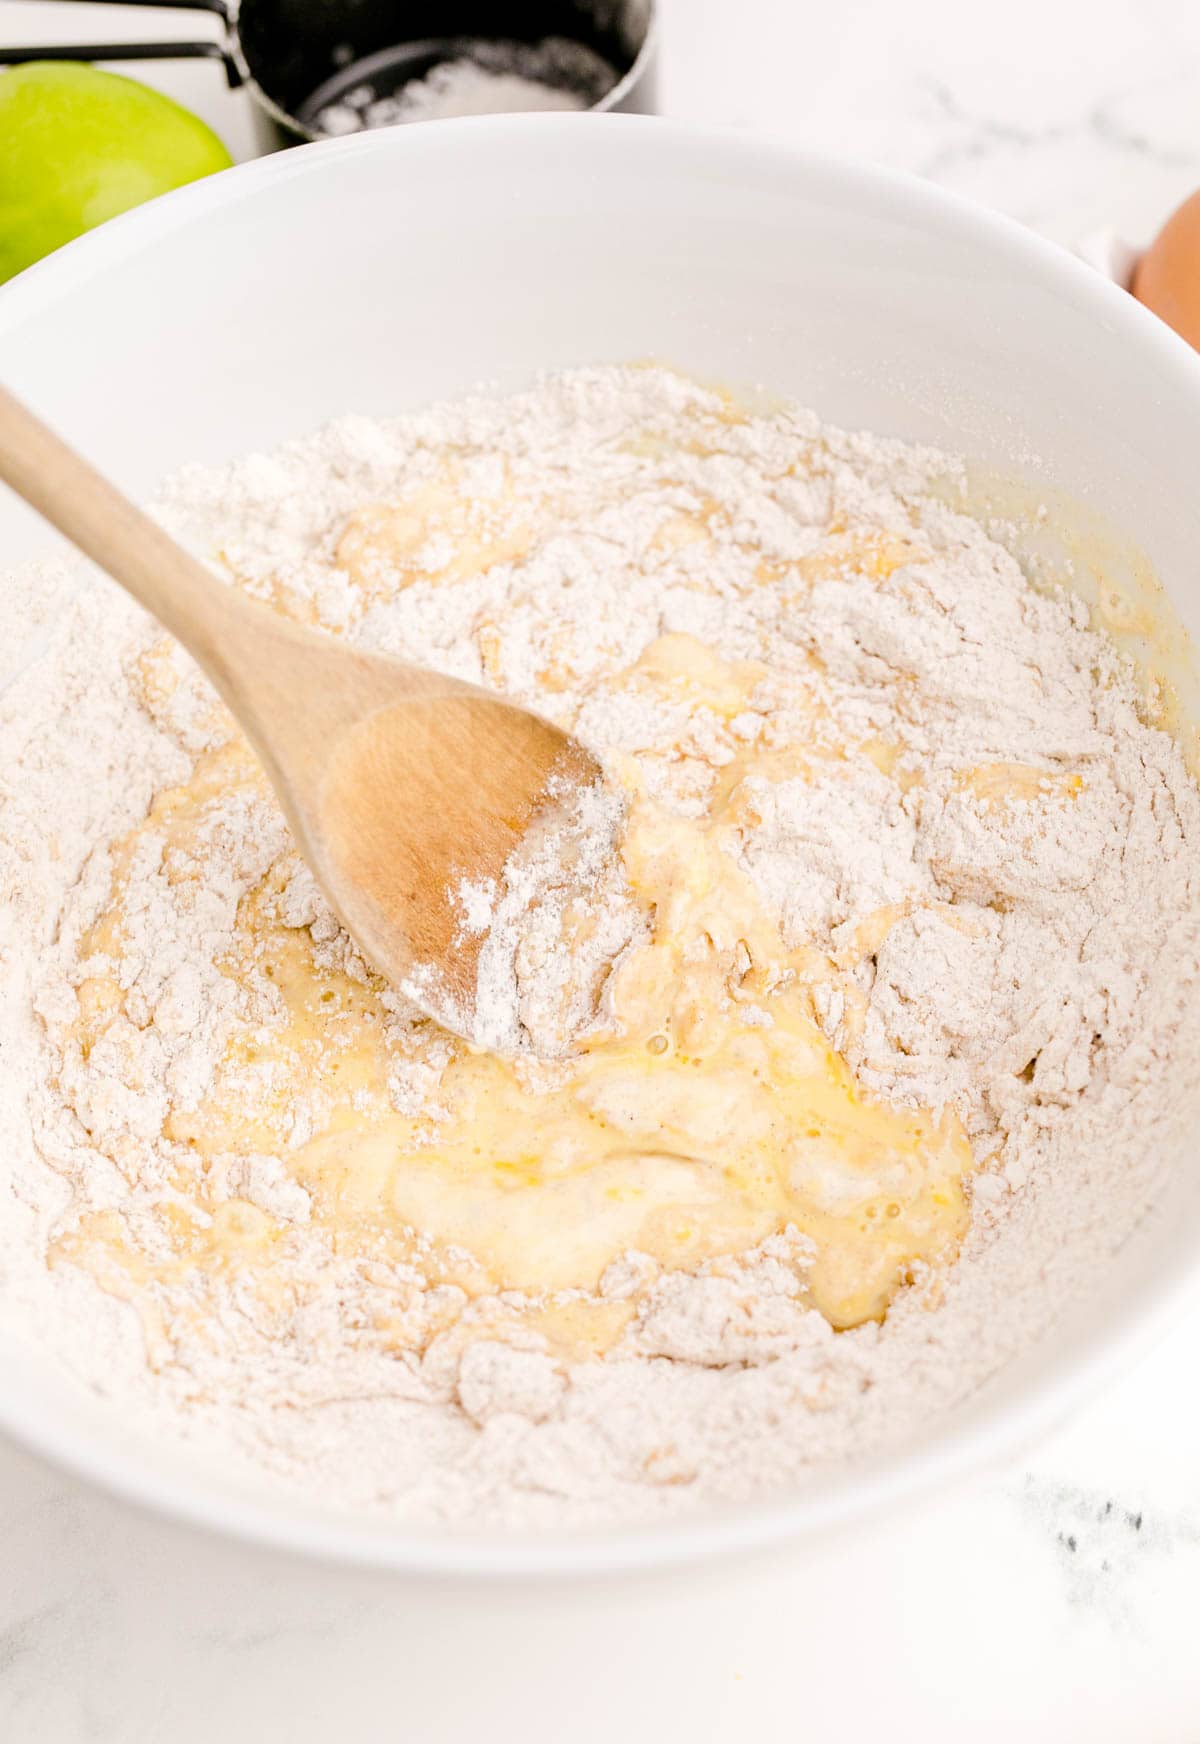 wet ingredients in a bowl of dry ingredients being mixed with a wooden spoon